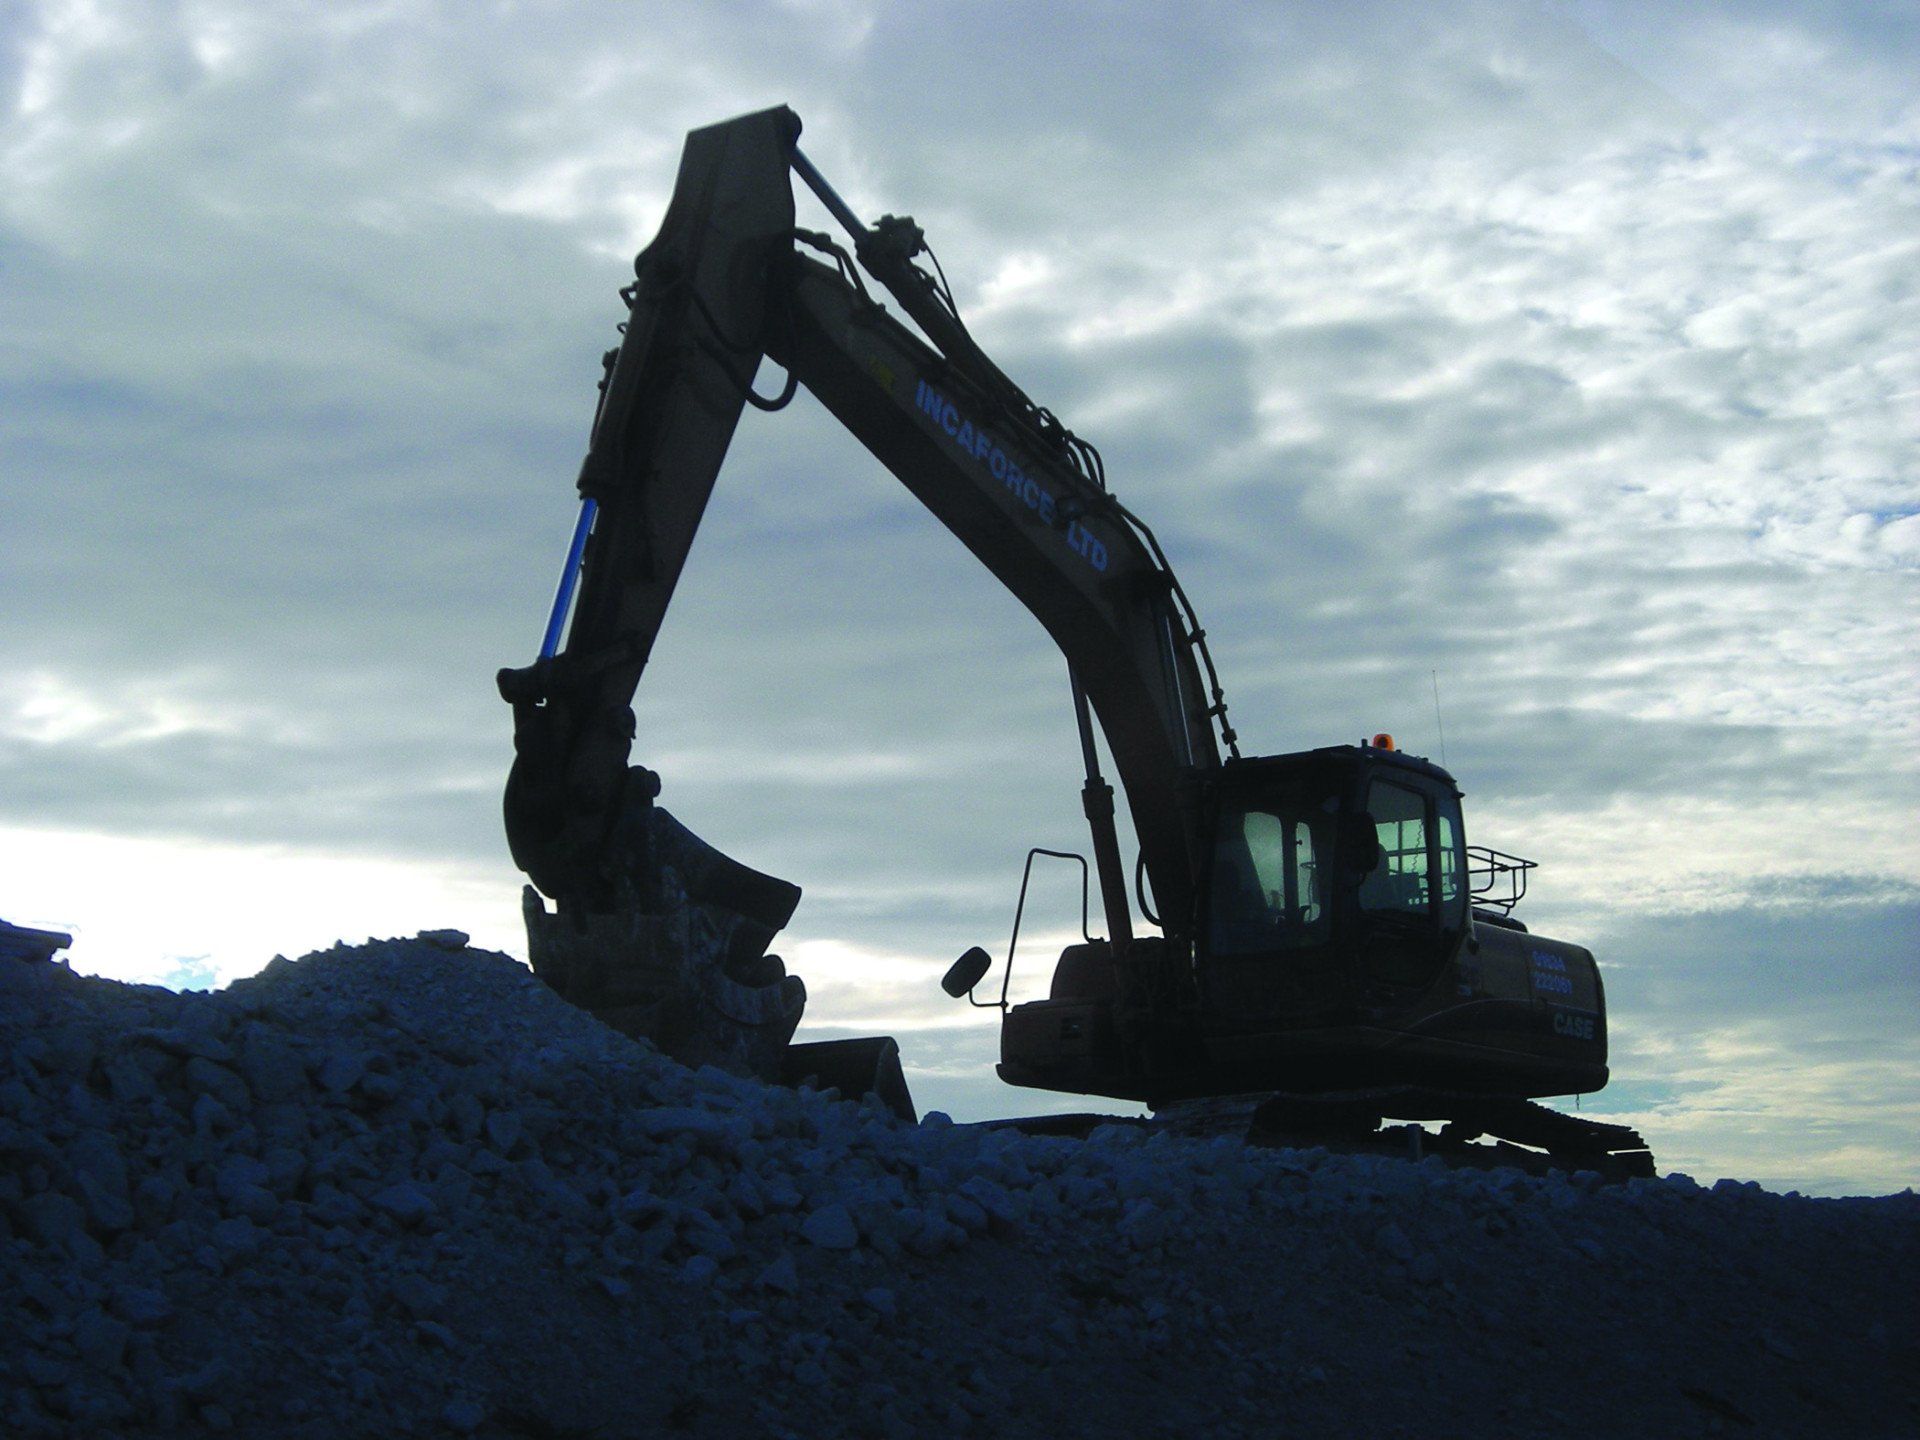 A greyed-out image of a crane on a landfill site